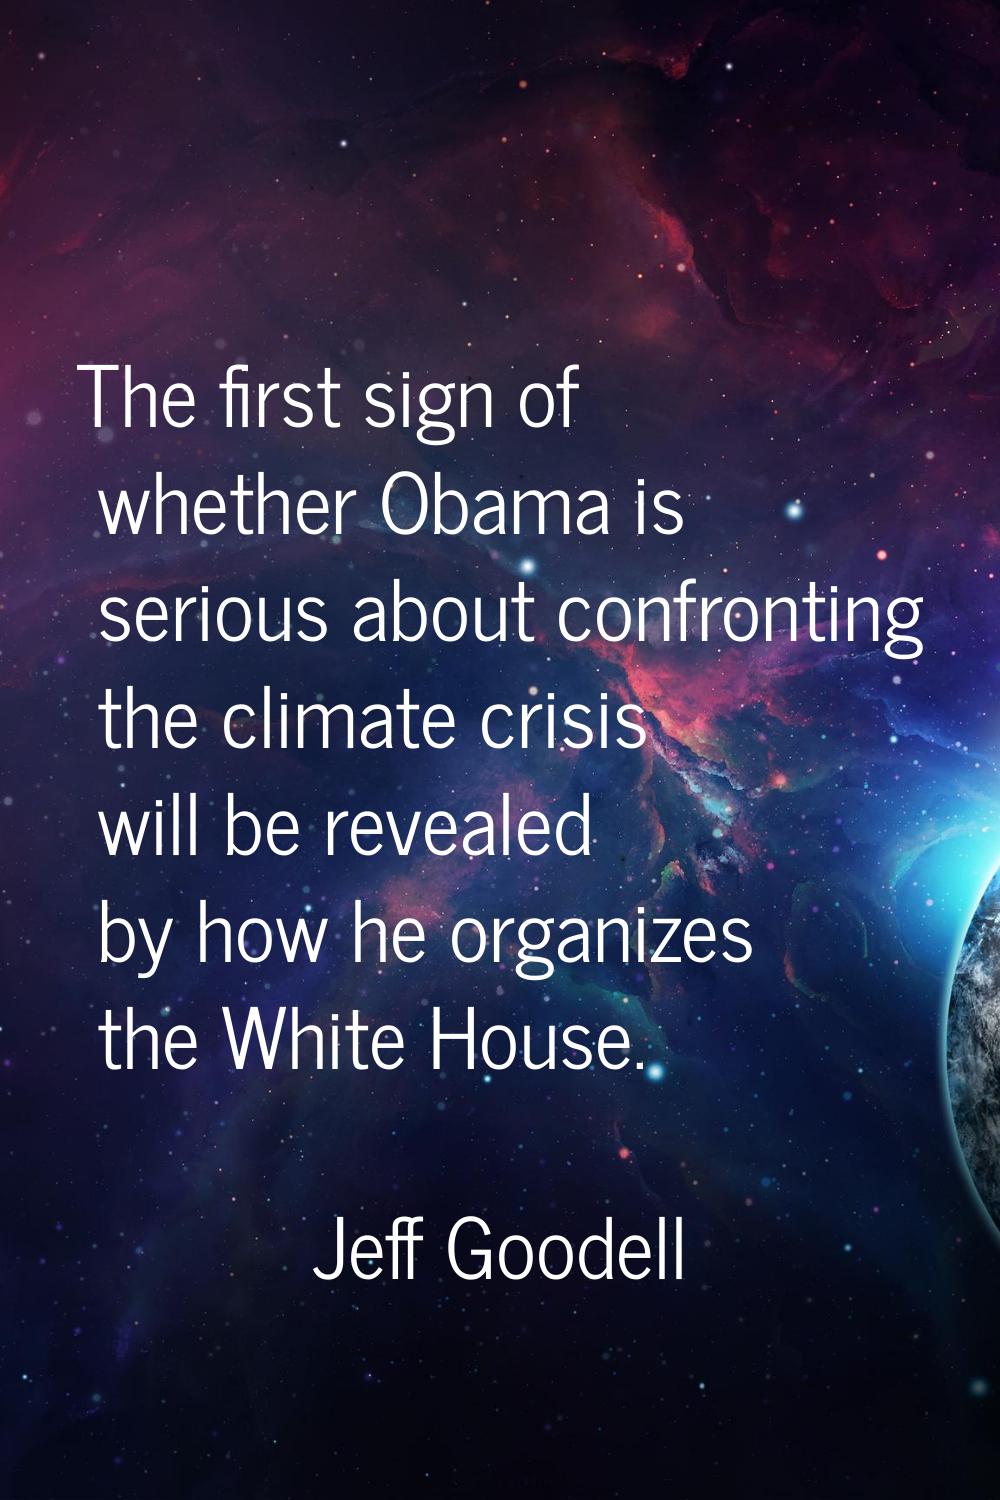 The first sign of whether Obama is serious about confronting the climate crisis will be revealed by